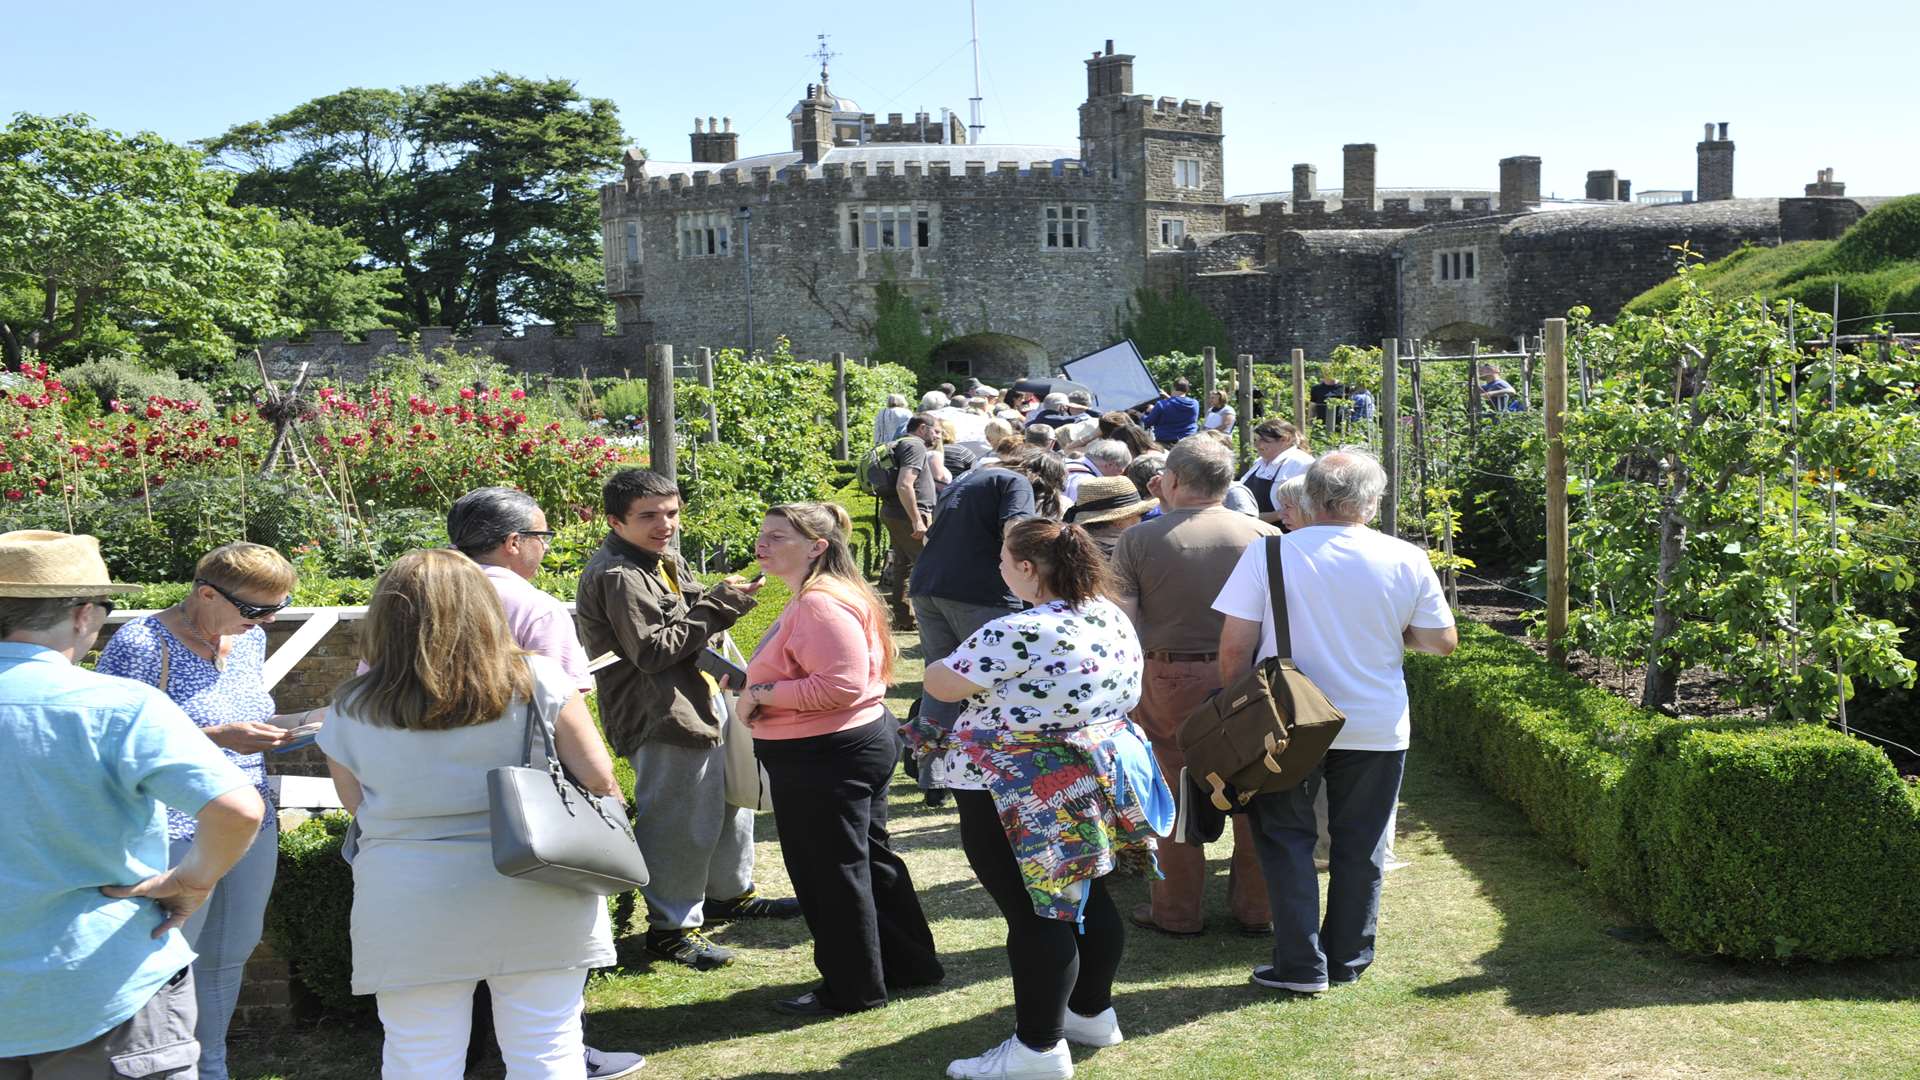 The BBC Antiques Roadshow was filmed at Walmer Castle in August